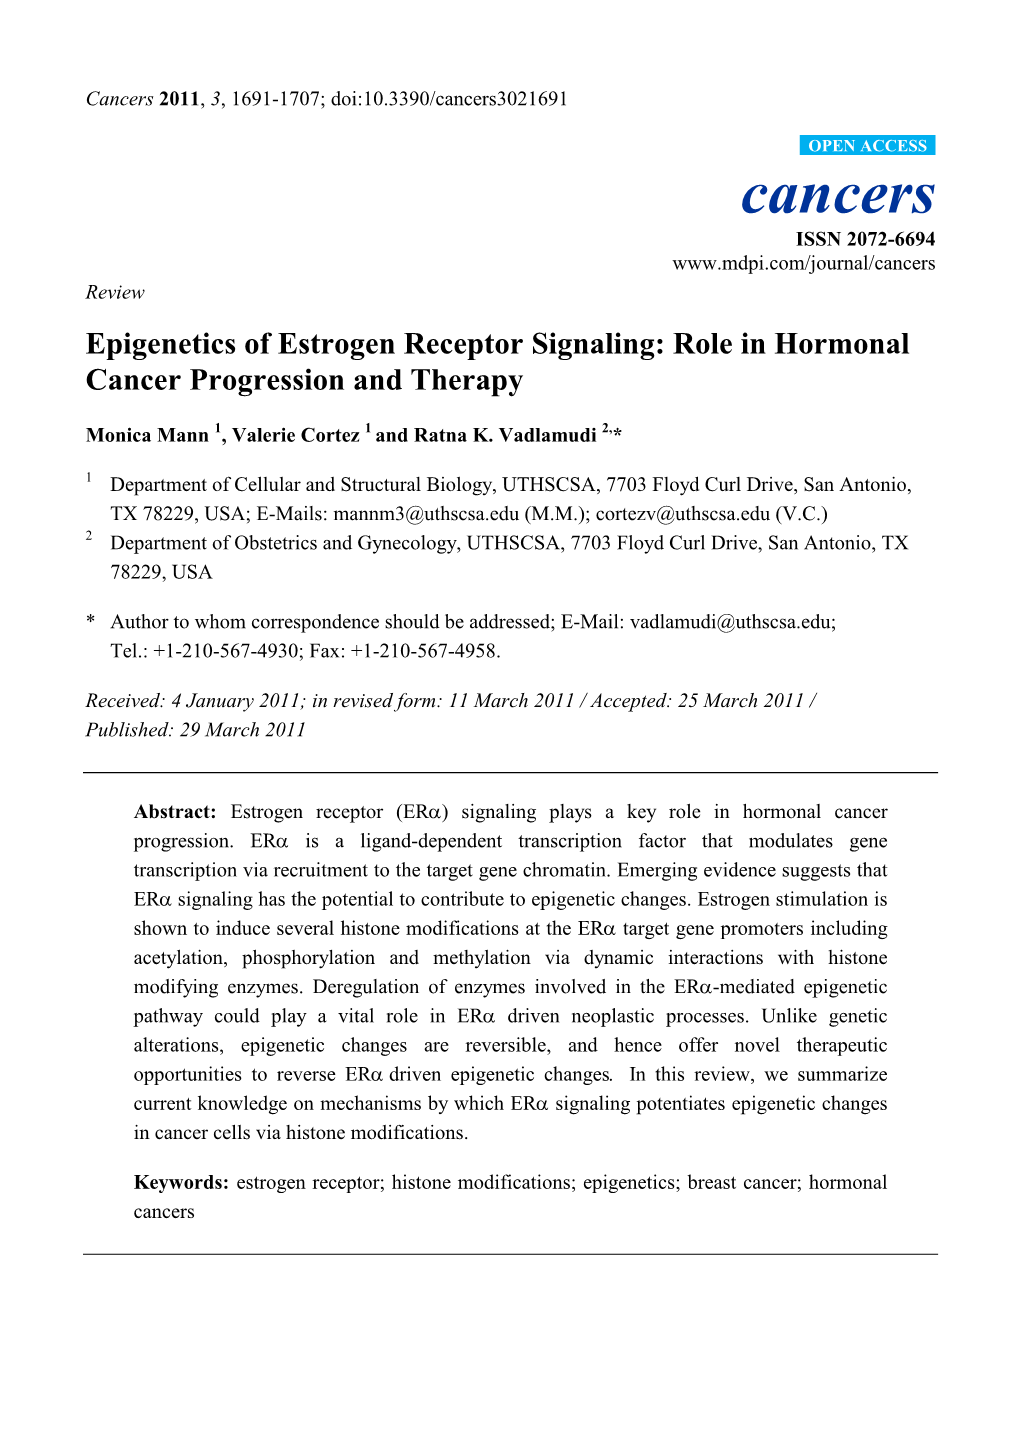 Epigenetics of Estrogen Receptor Signaling: Role in Hormonal Cancer Progression and Therapy